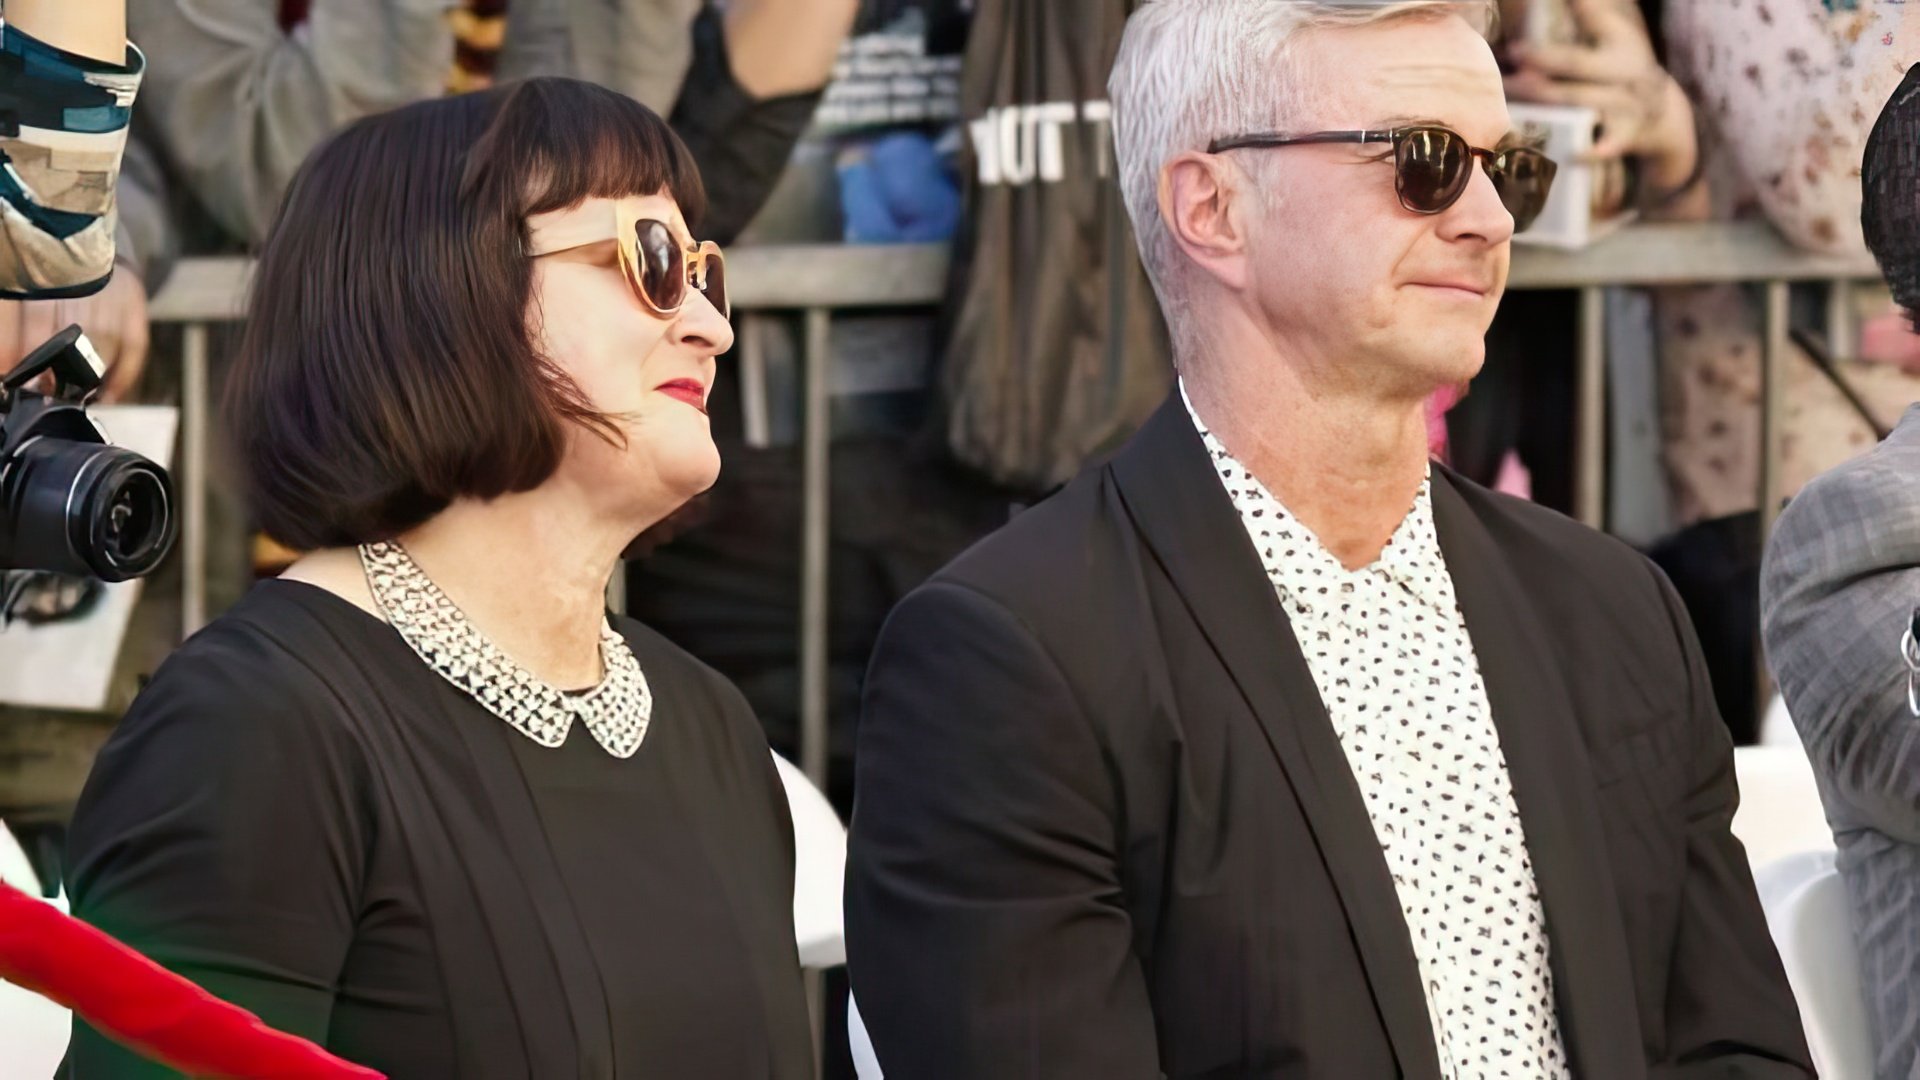 Daniel Radcliffe's parents at the premiere of the film featuring their son